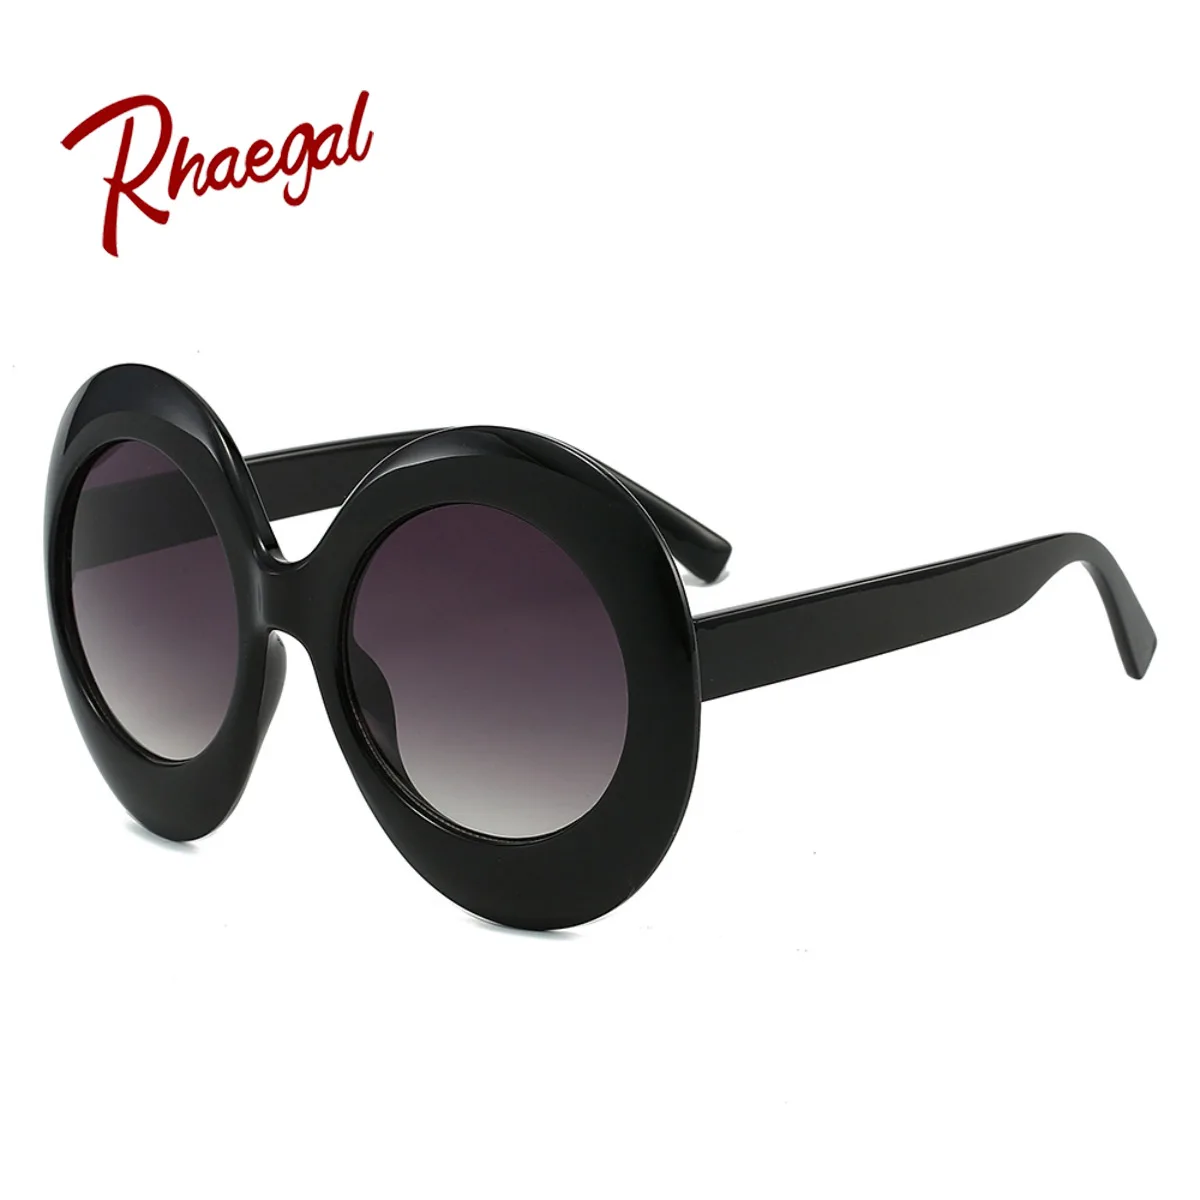 

Rhaegal New Trendy Hip-Hop Oversized Round Sunglasses for Women Statement Fashion Sun Shade Glasses Party Travel Cool Eyewear